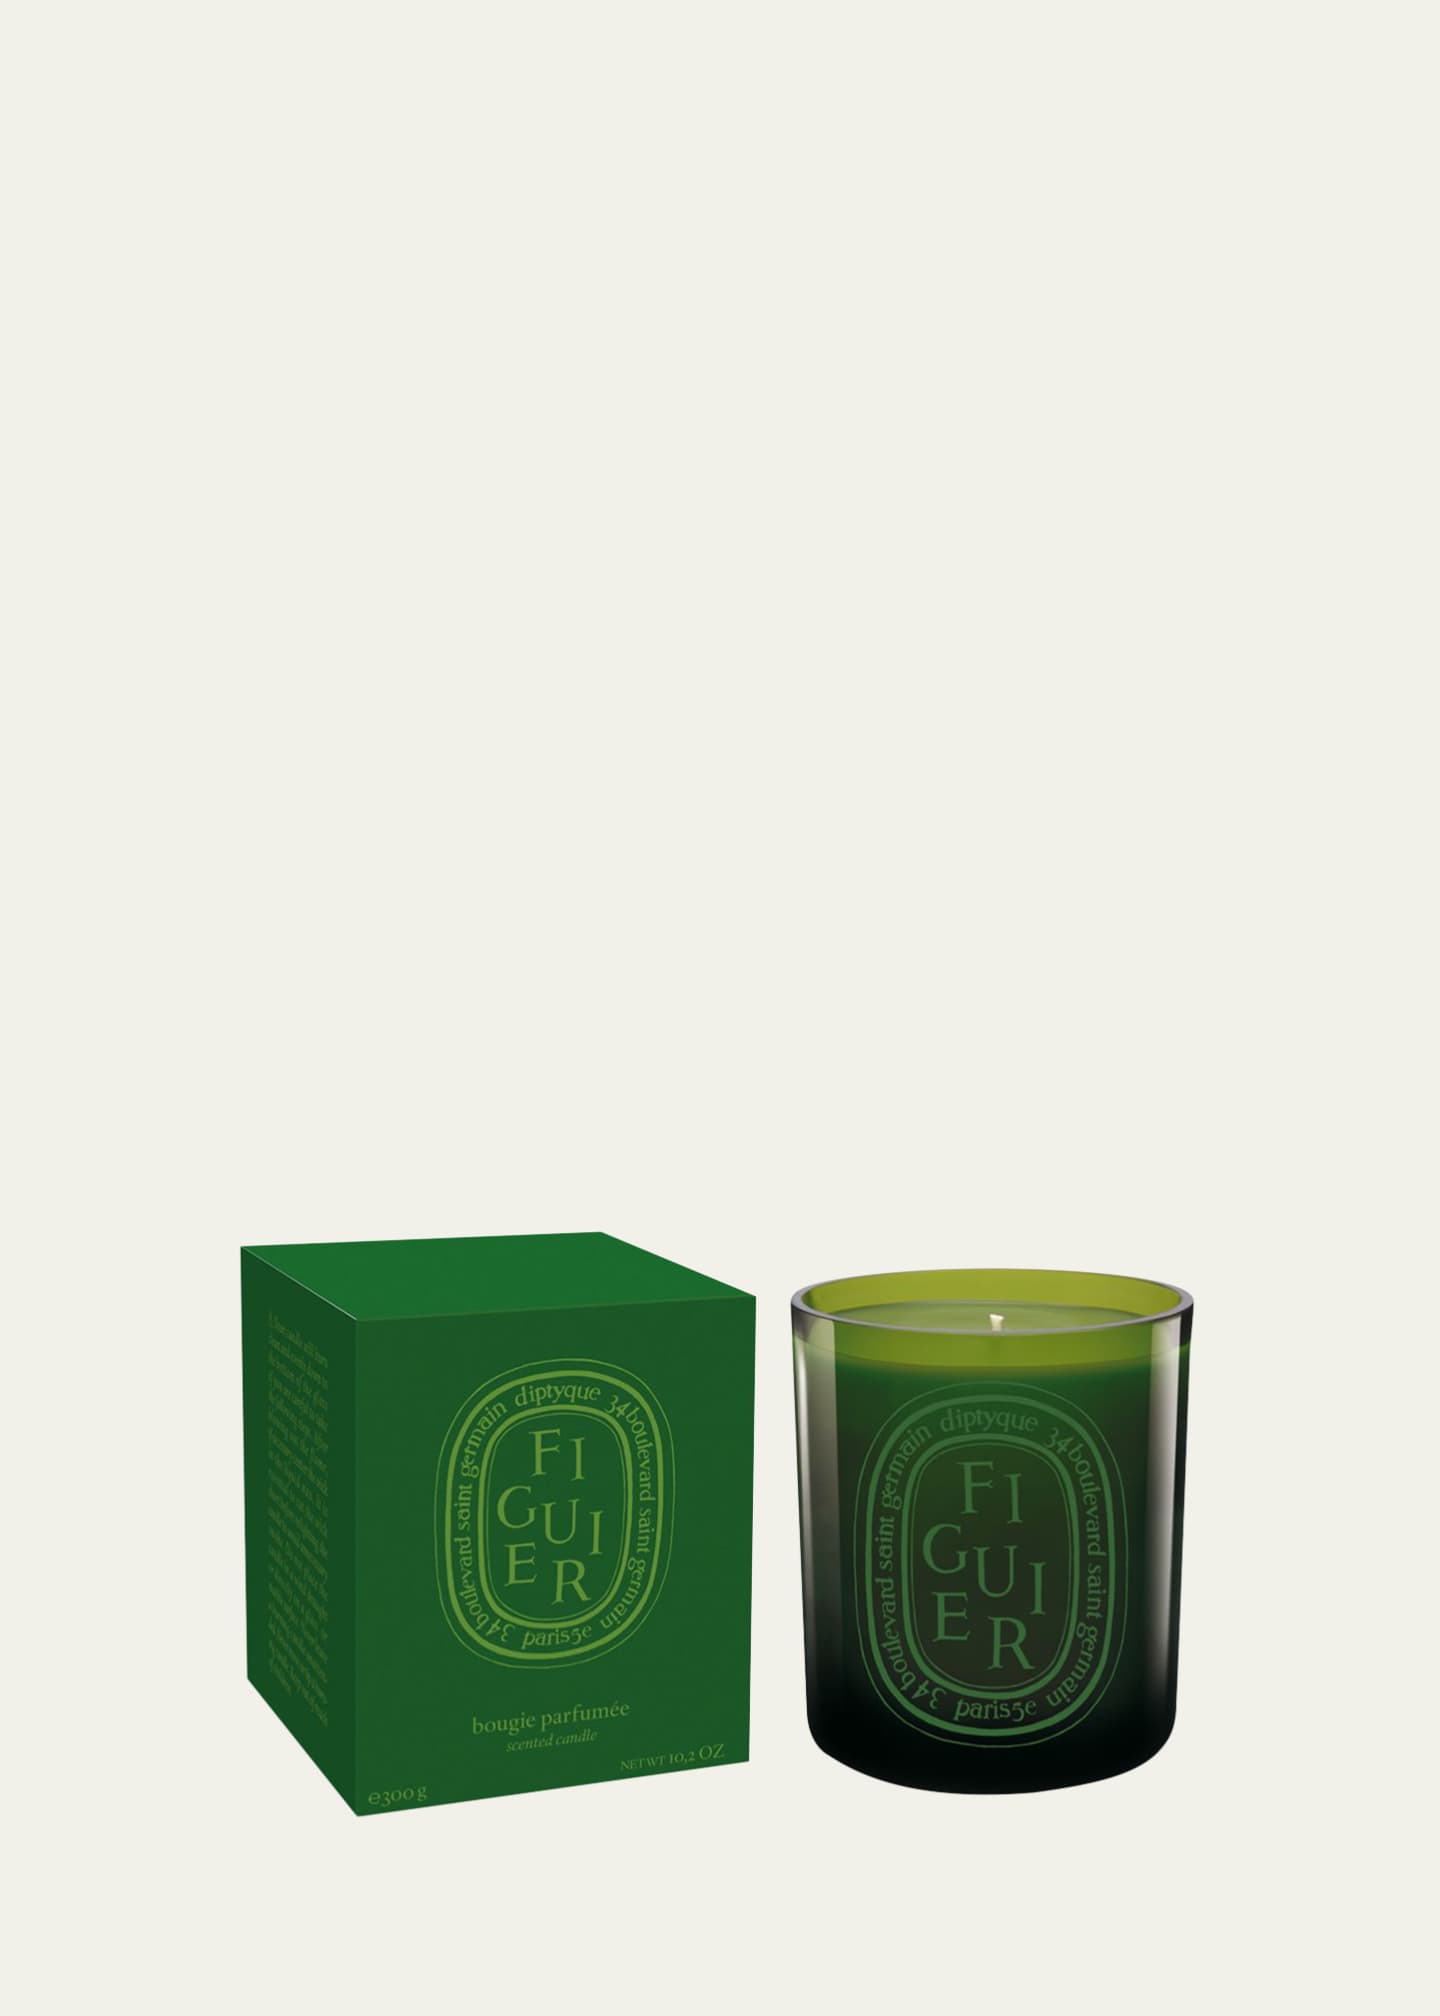 DIPTYQUE Figuier (Fig) Scented Candle, 10.2 oz.